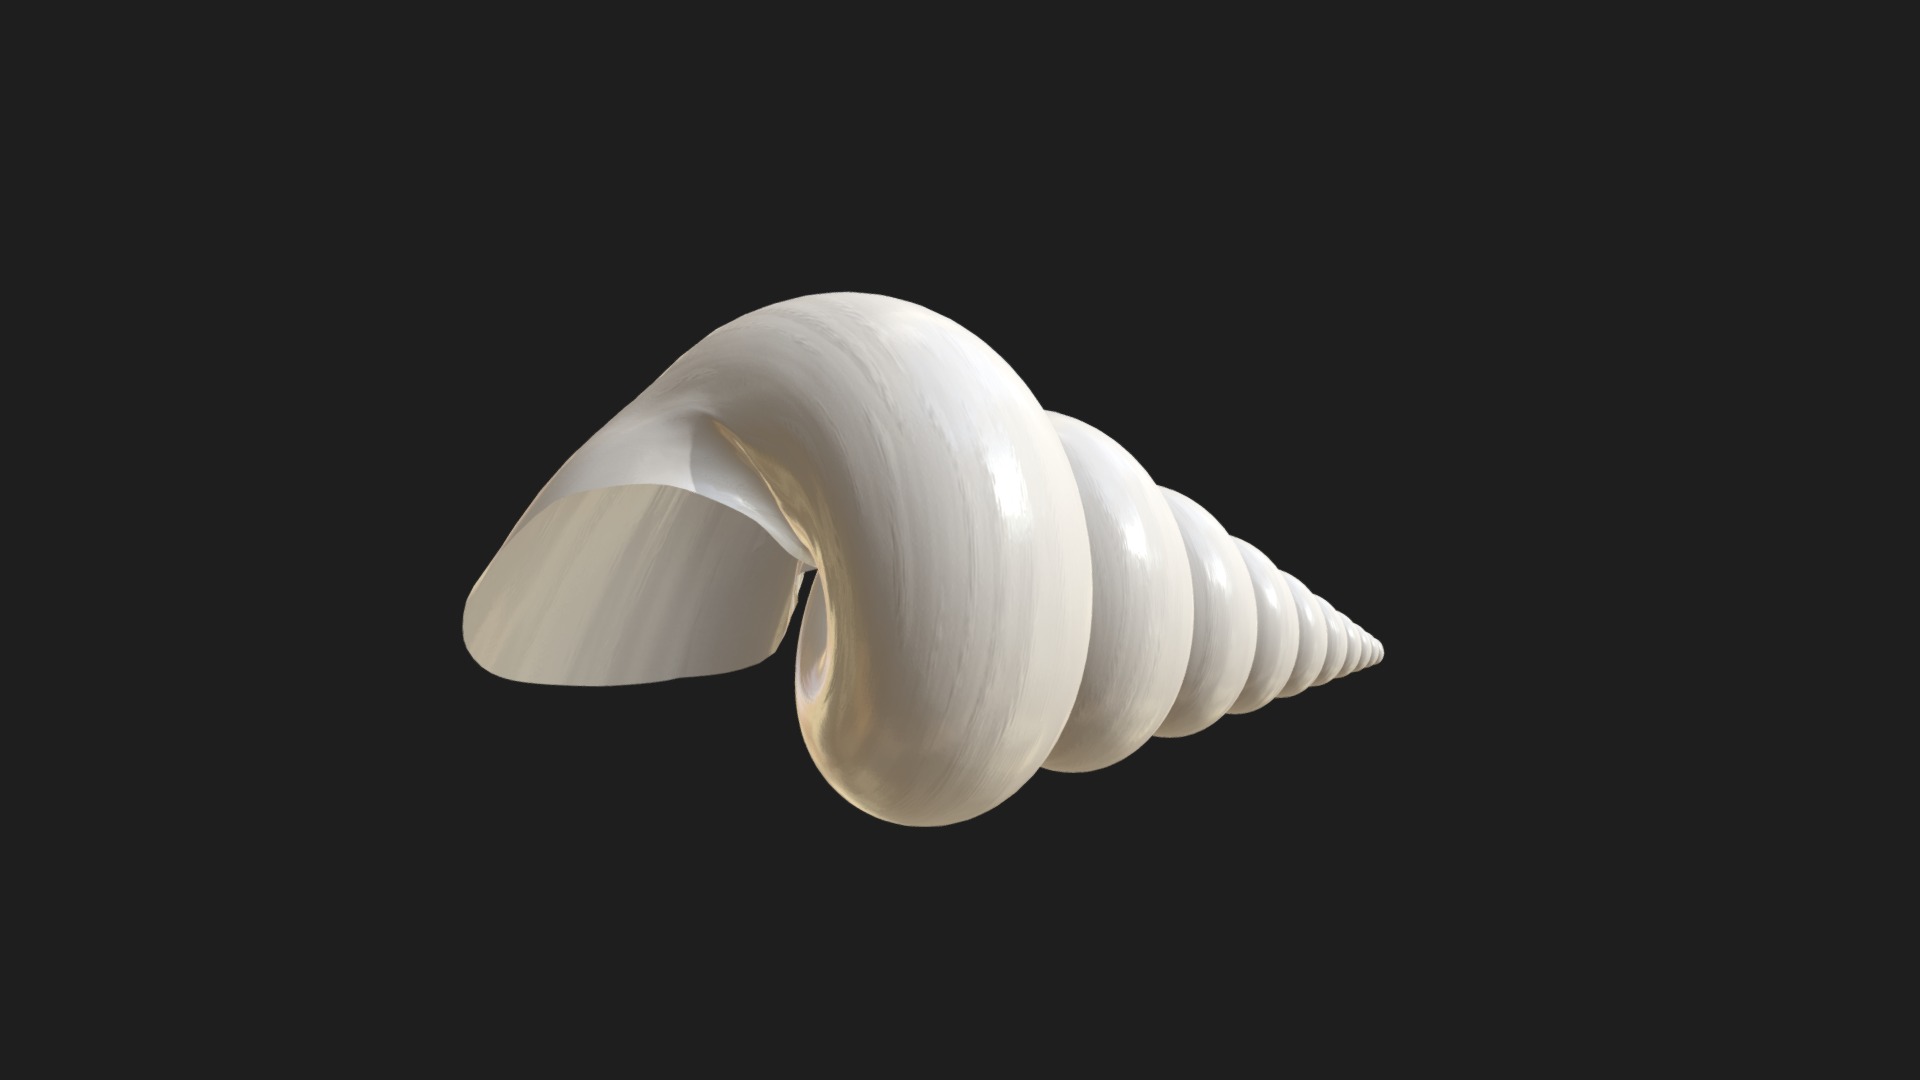 3D model Stylized triton seashell - This is a 3D model of the Stylized triton seashell. The 3D model is about a white lamp shade.